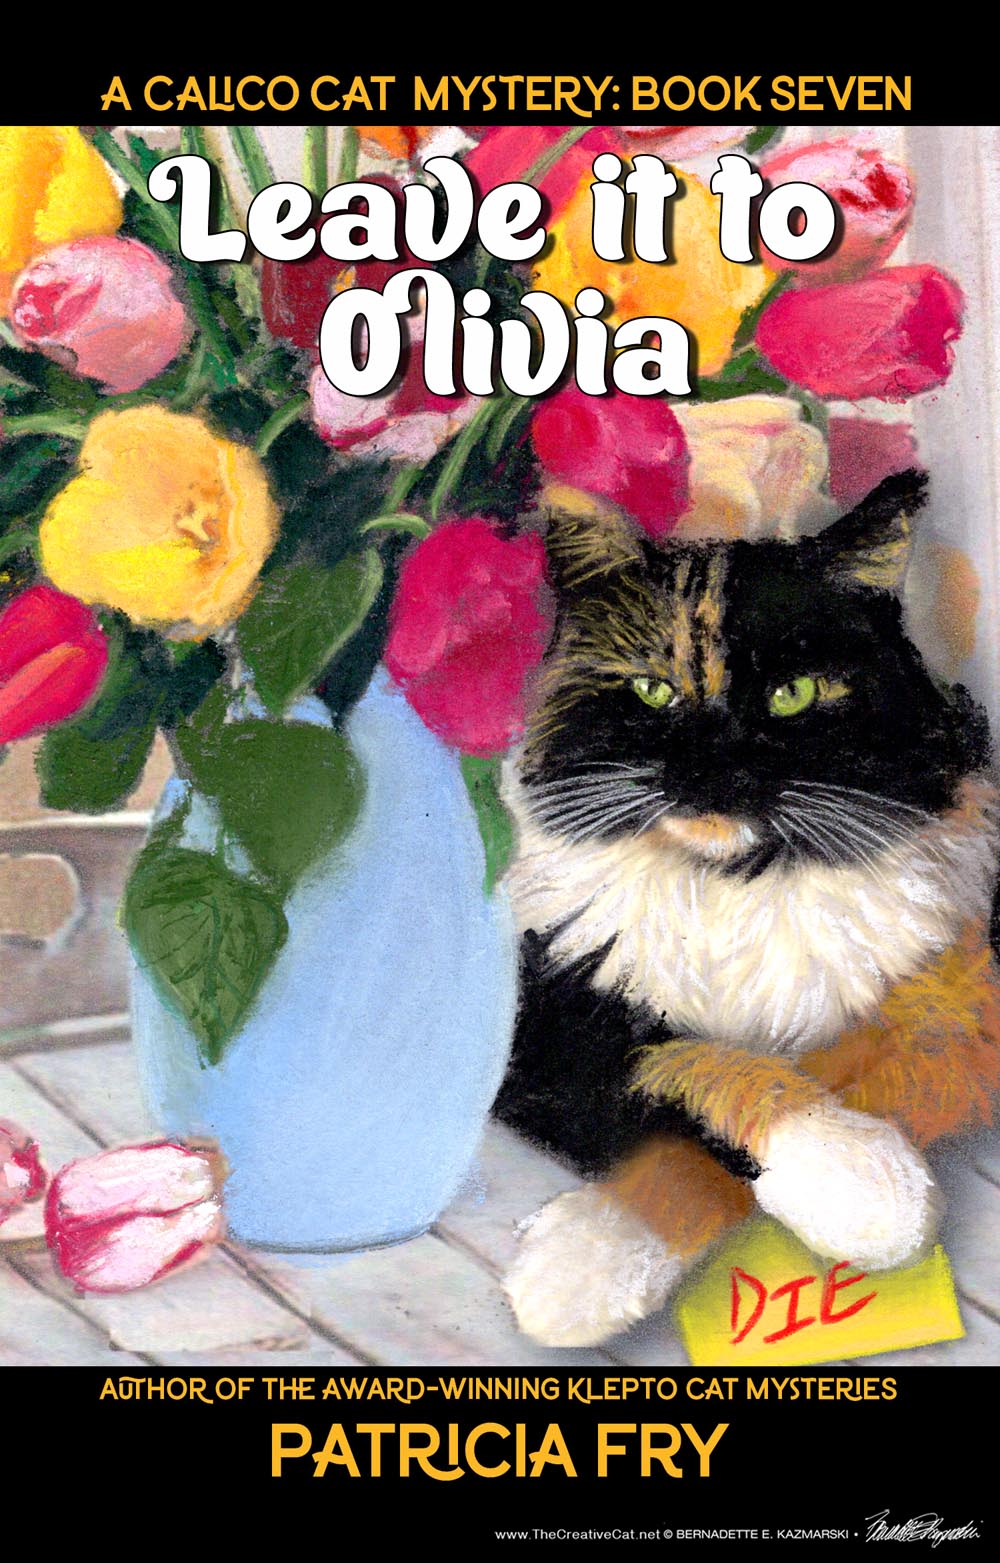 cozy cat mystery book cover